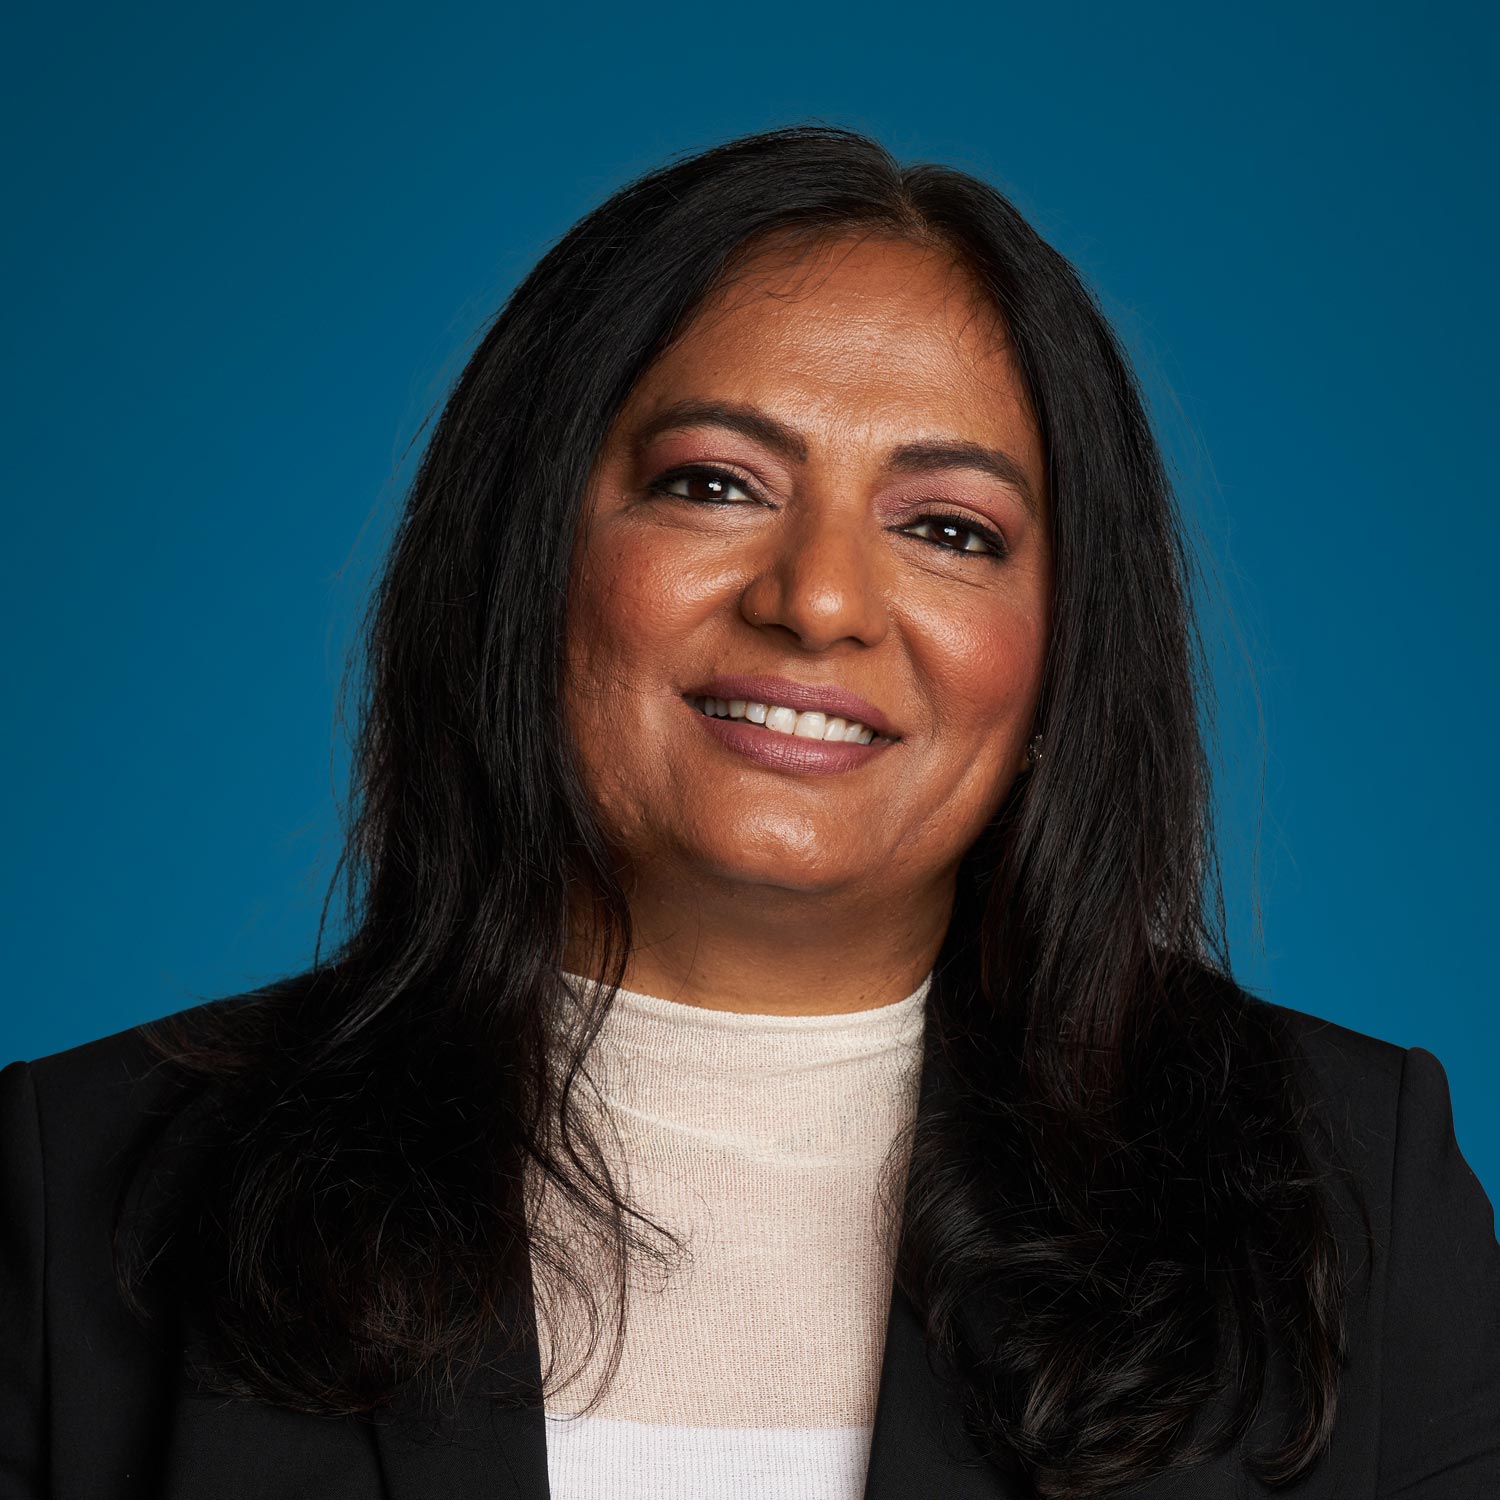 Portrait of Aparna Rayasam, Chief Product Officer